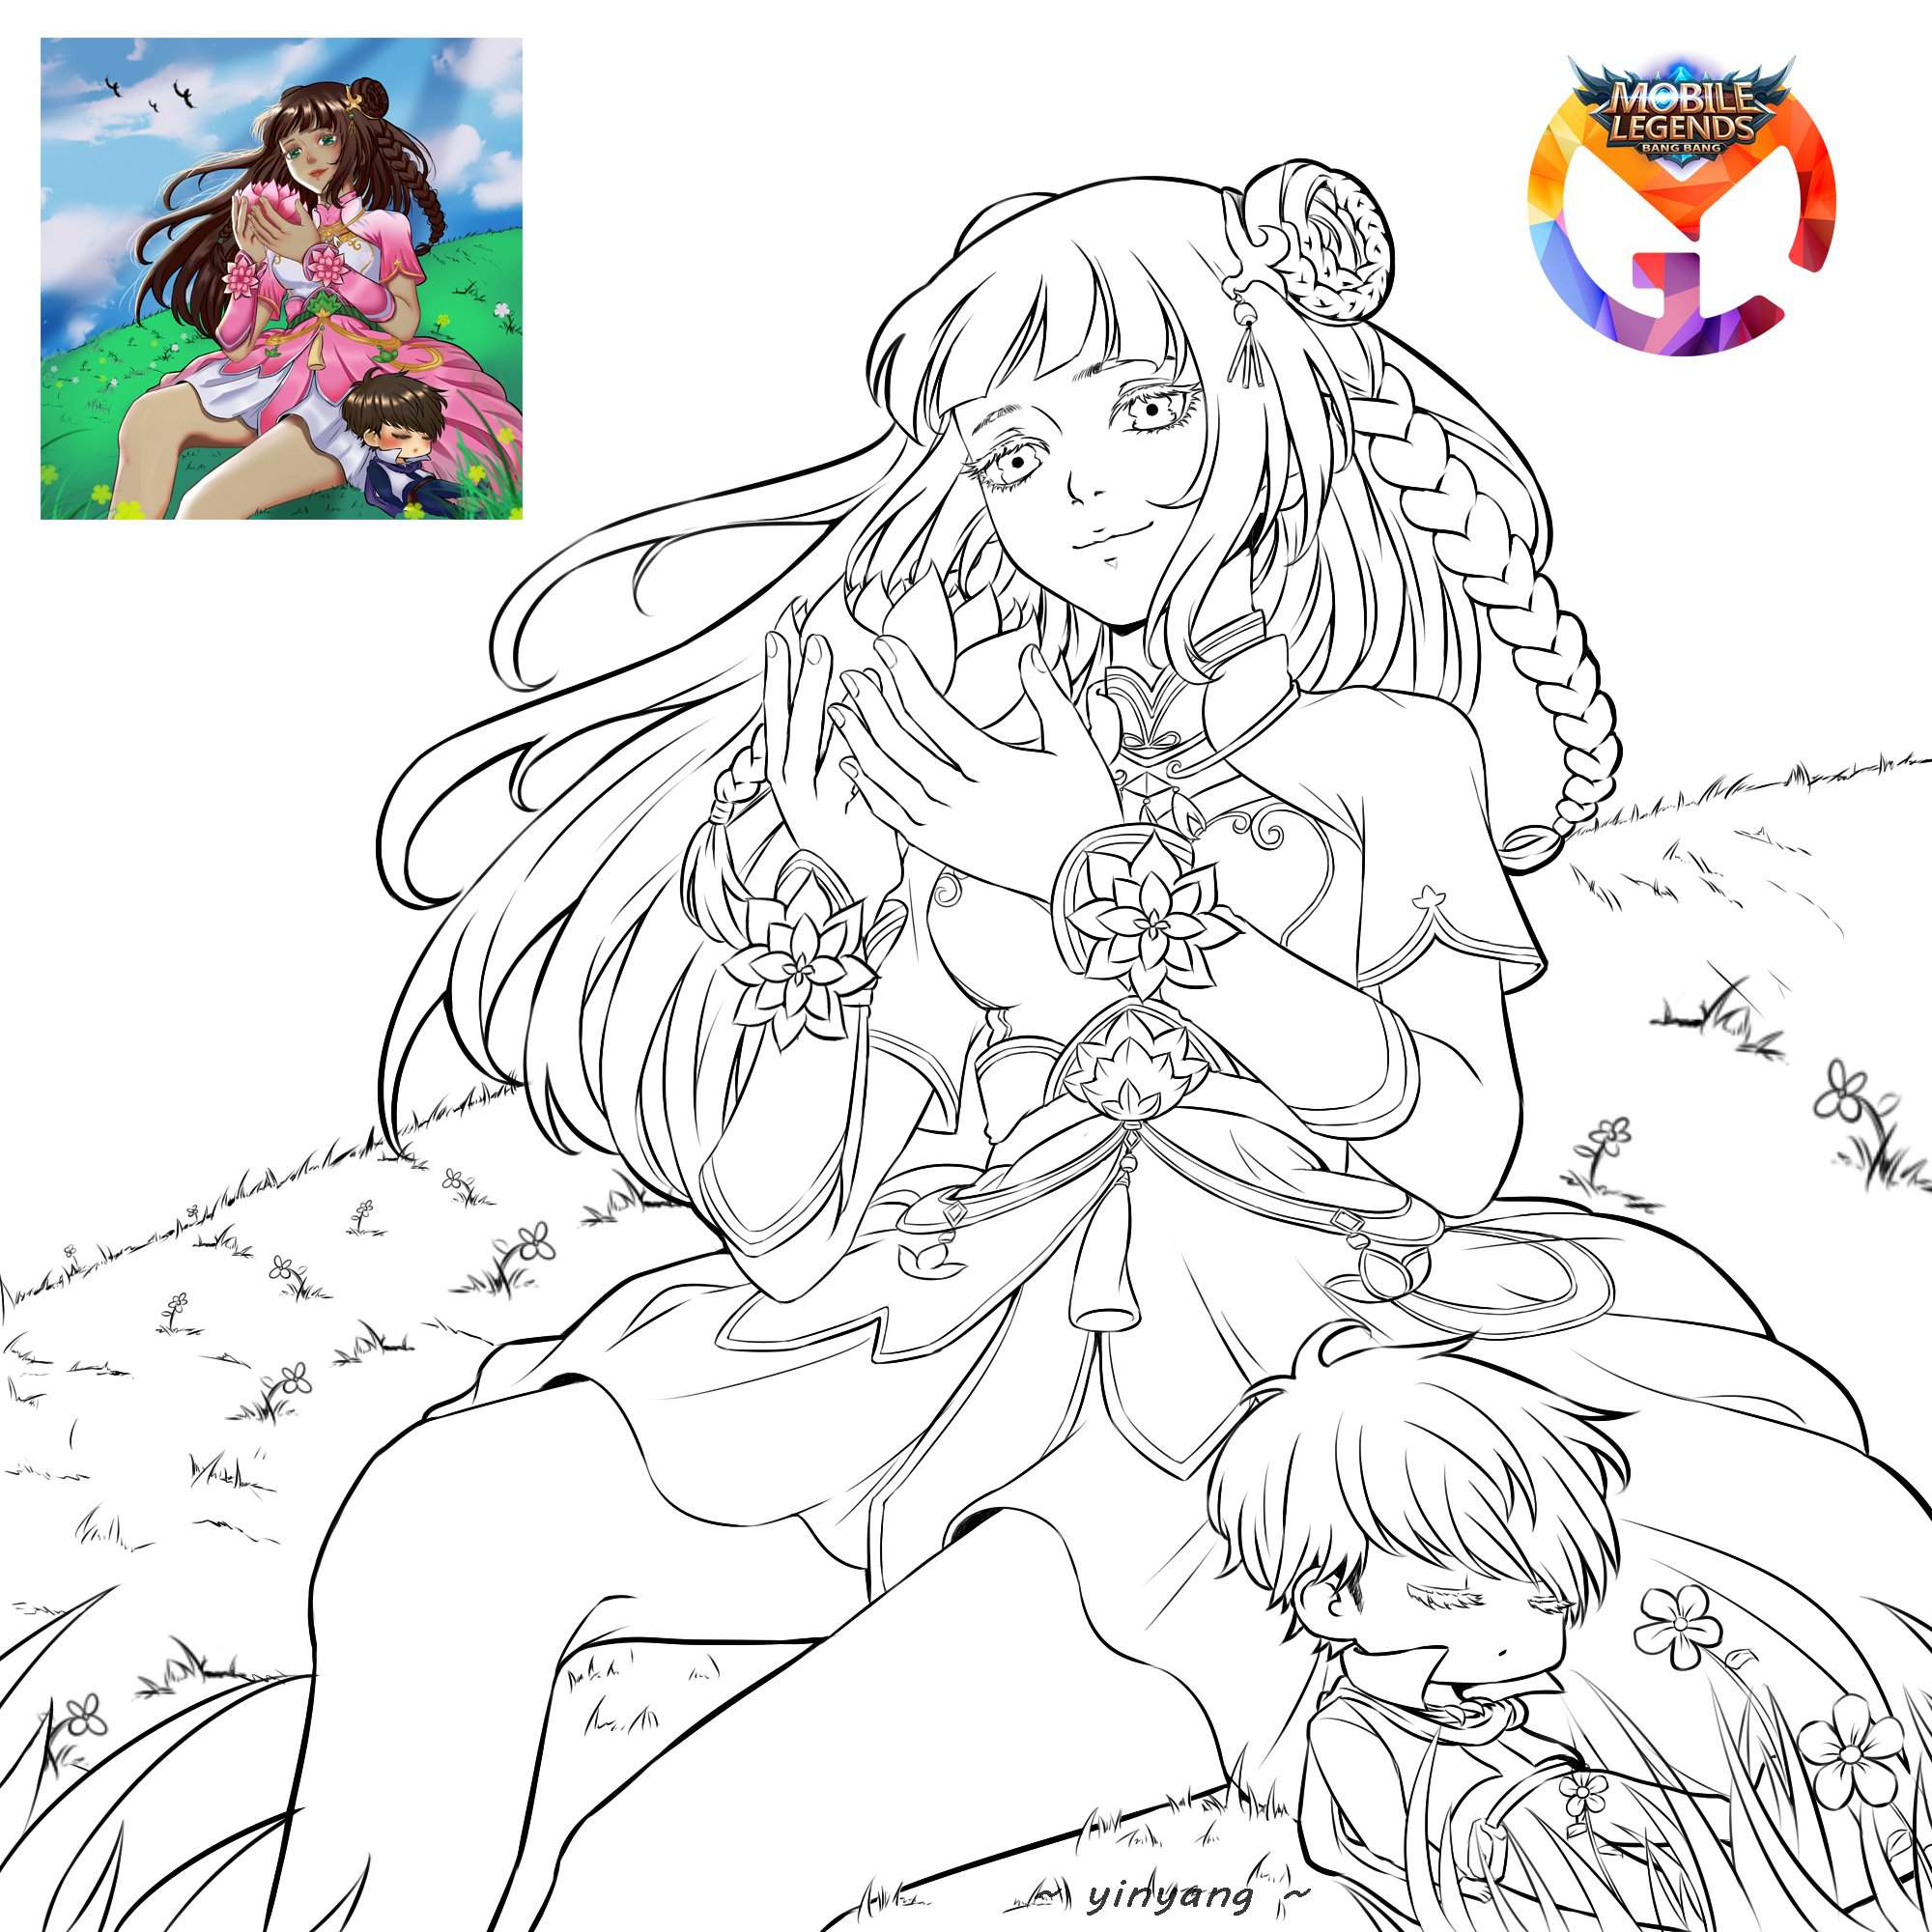 National Coloring Day   ◇Mobile Legends Amino◇ Amino